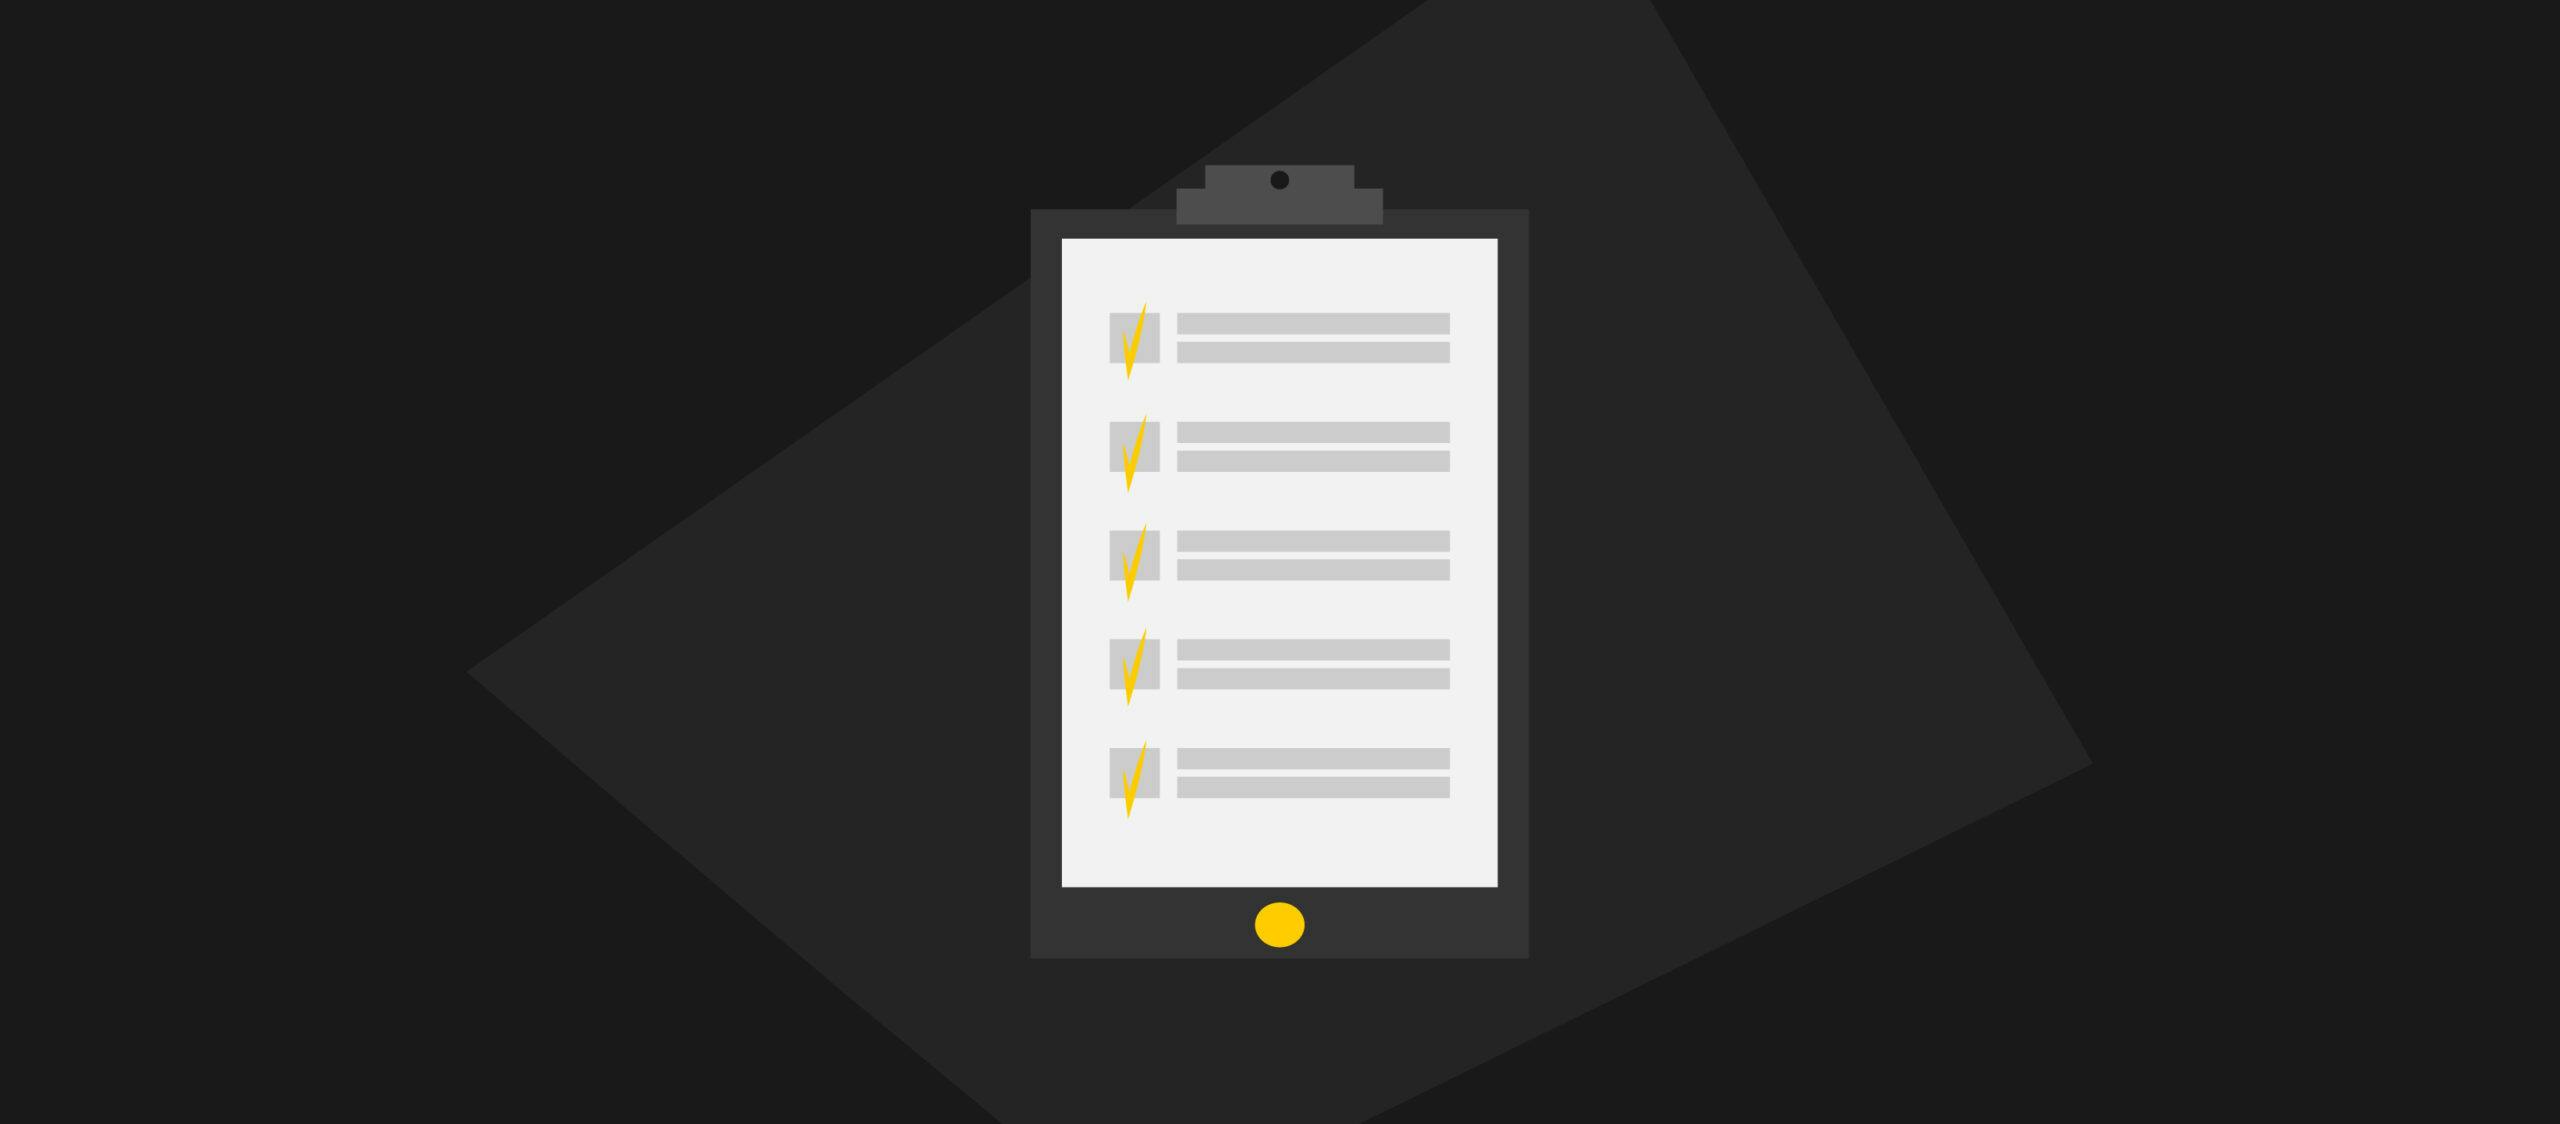 Checklist Before Implementing Your App Idea